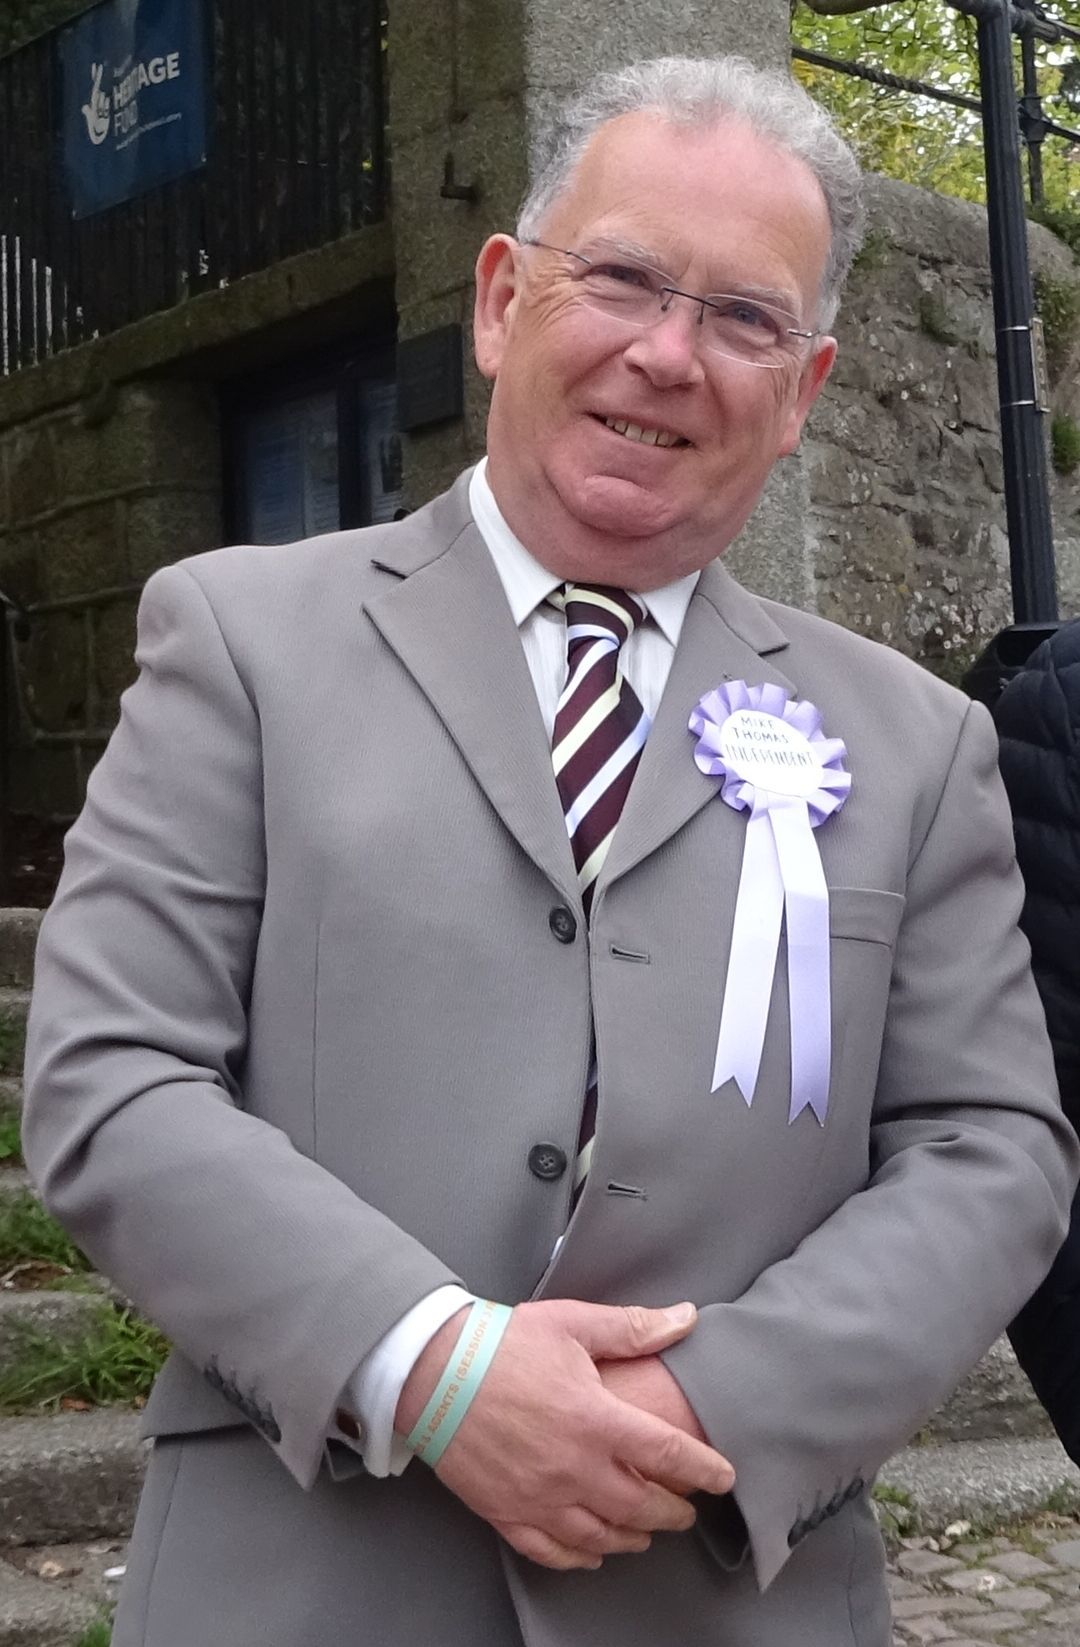 Mike Thomas was re-elected to Helston North division